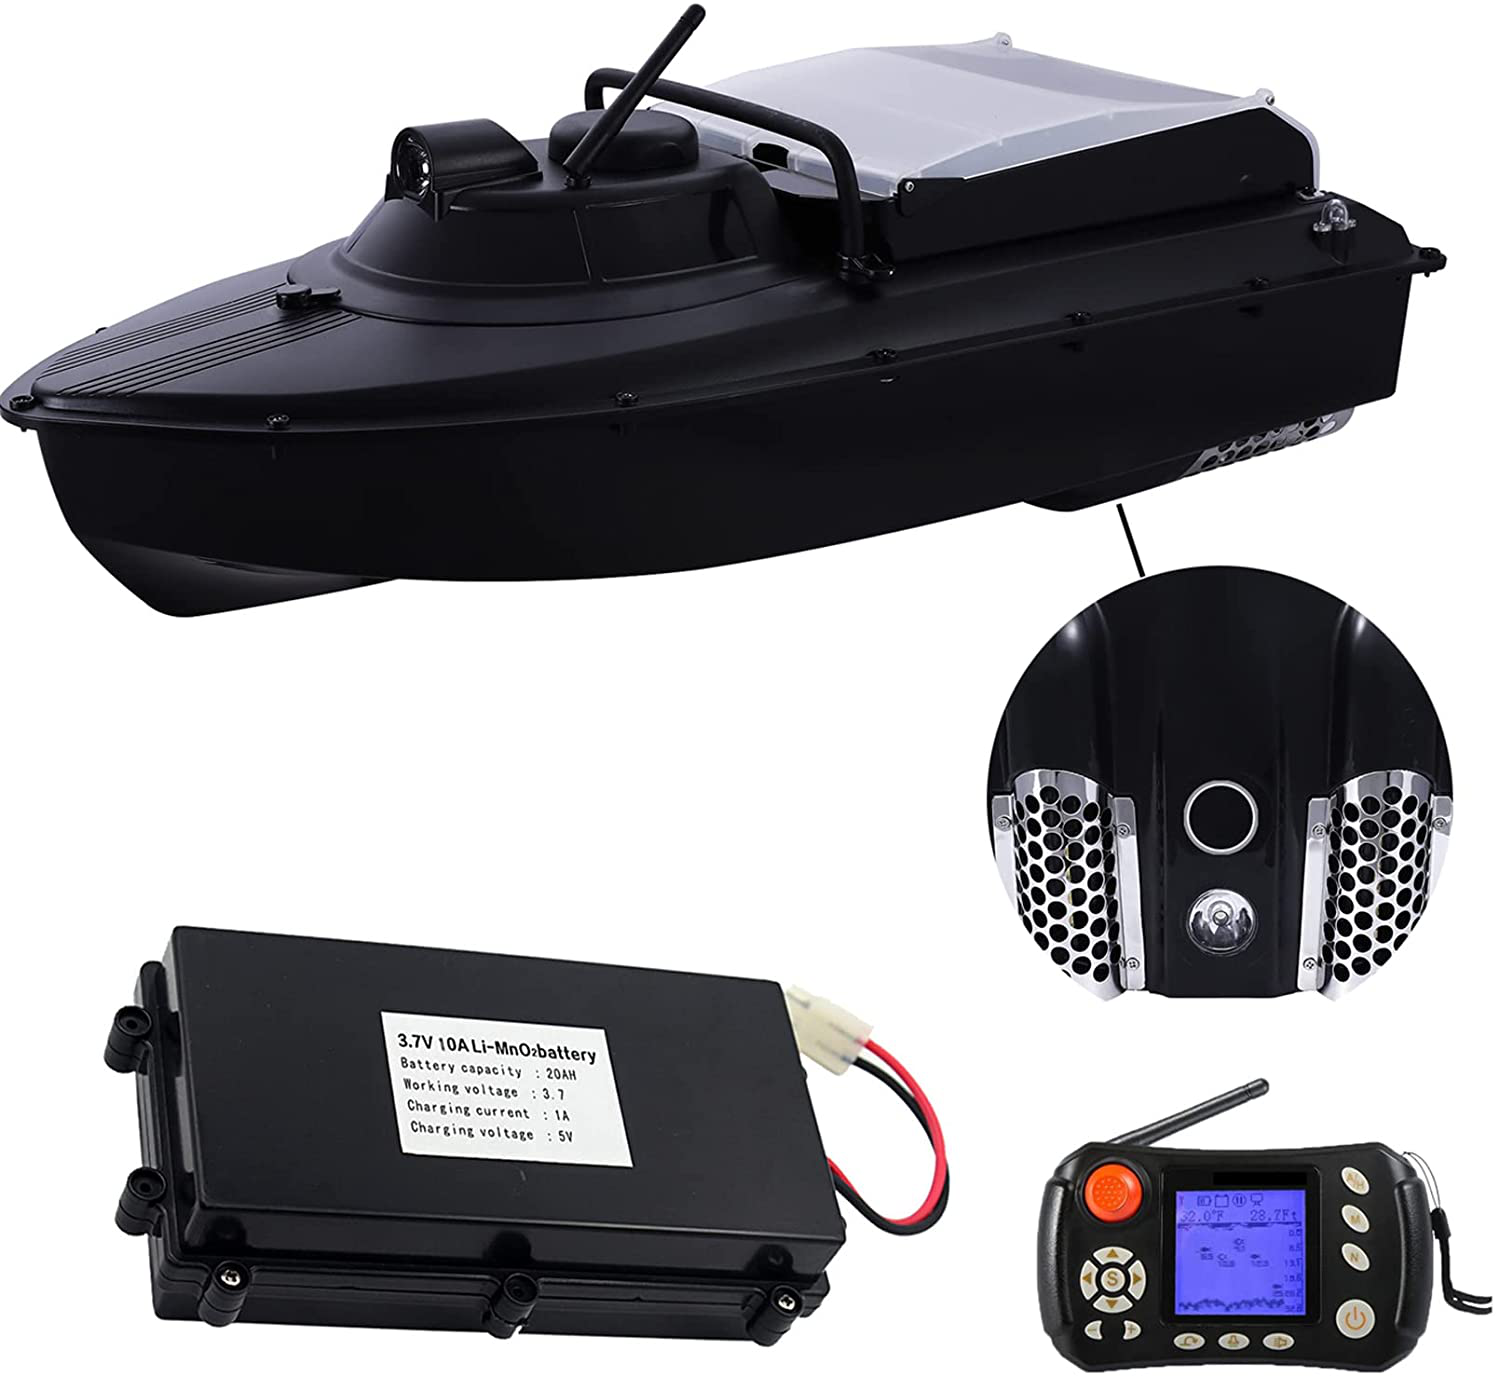 Fish Finder RC Bait Boat for Fishing with Remote Control GPS, Bait